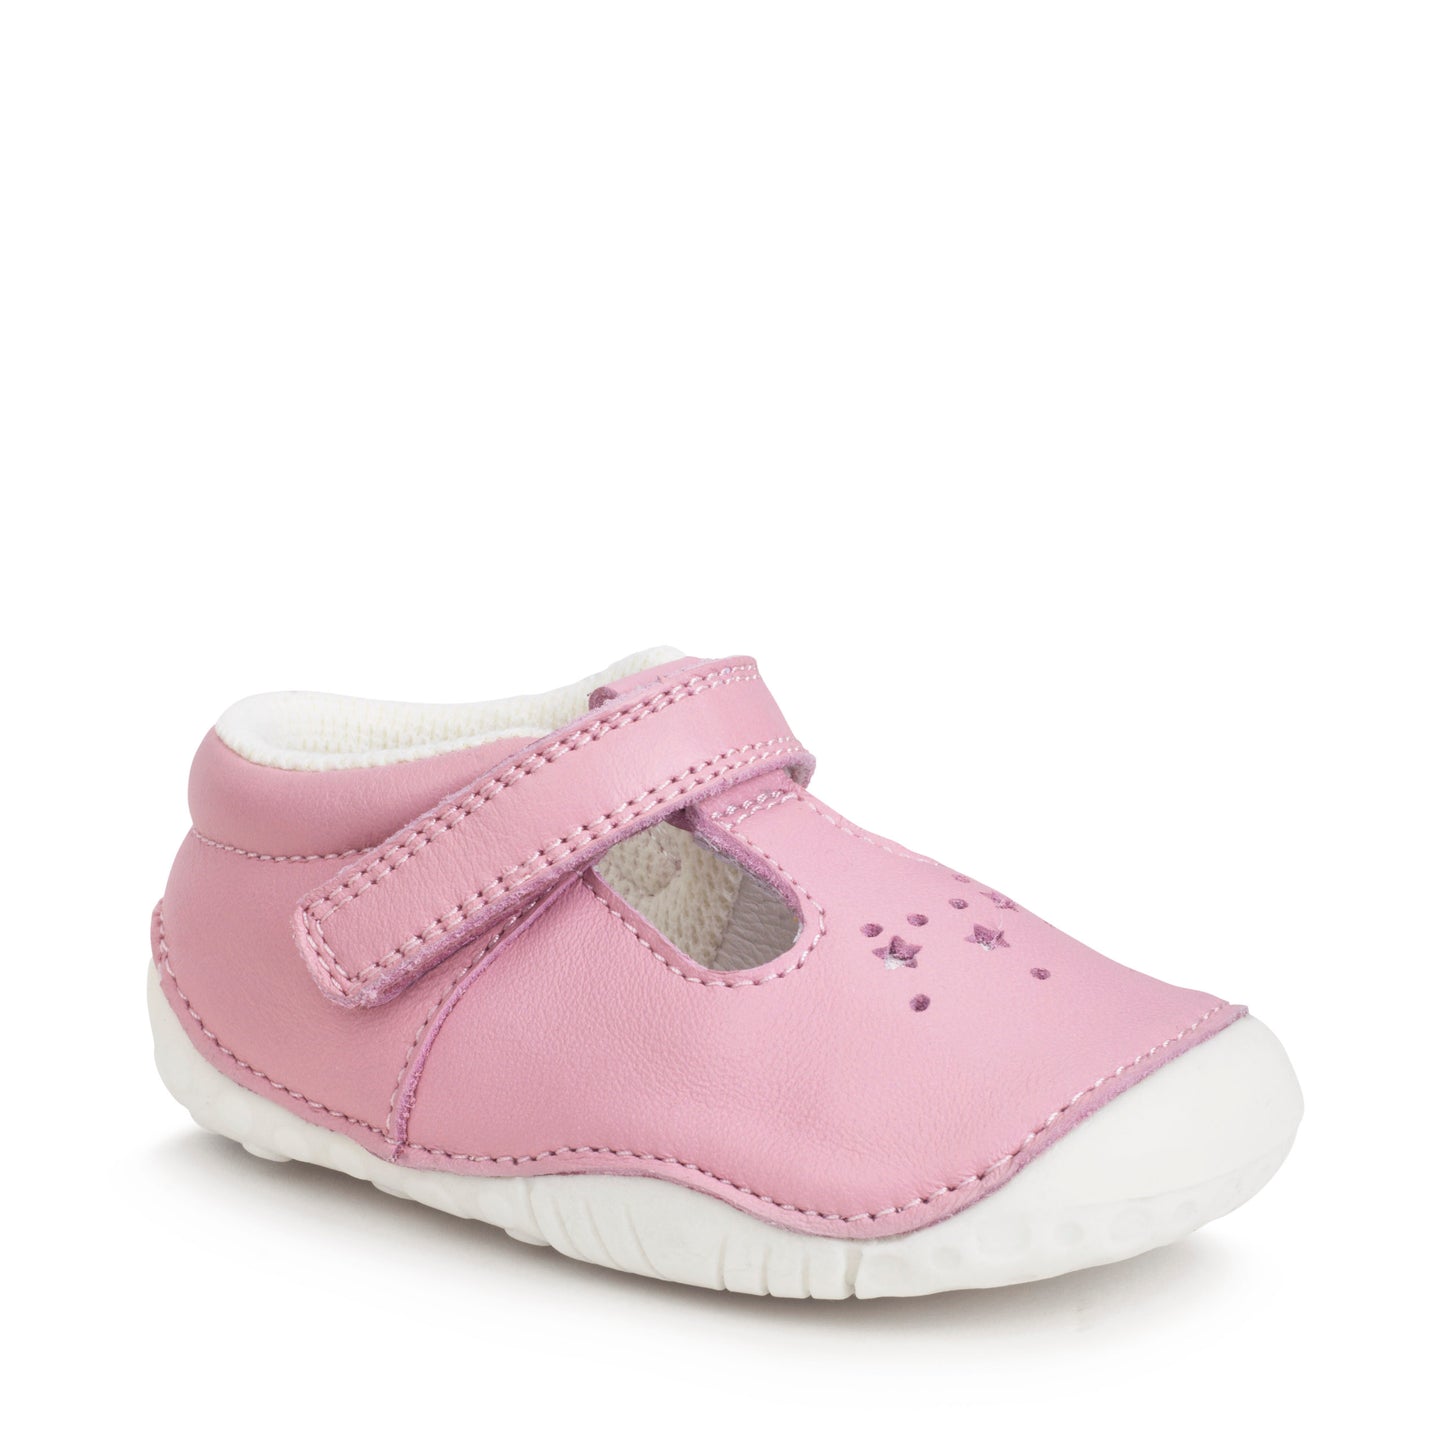 A girls pre-walker by Start-Rite ,style Tumble, in pink leather with velcro fastening. Angled view.